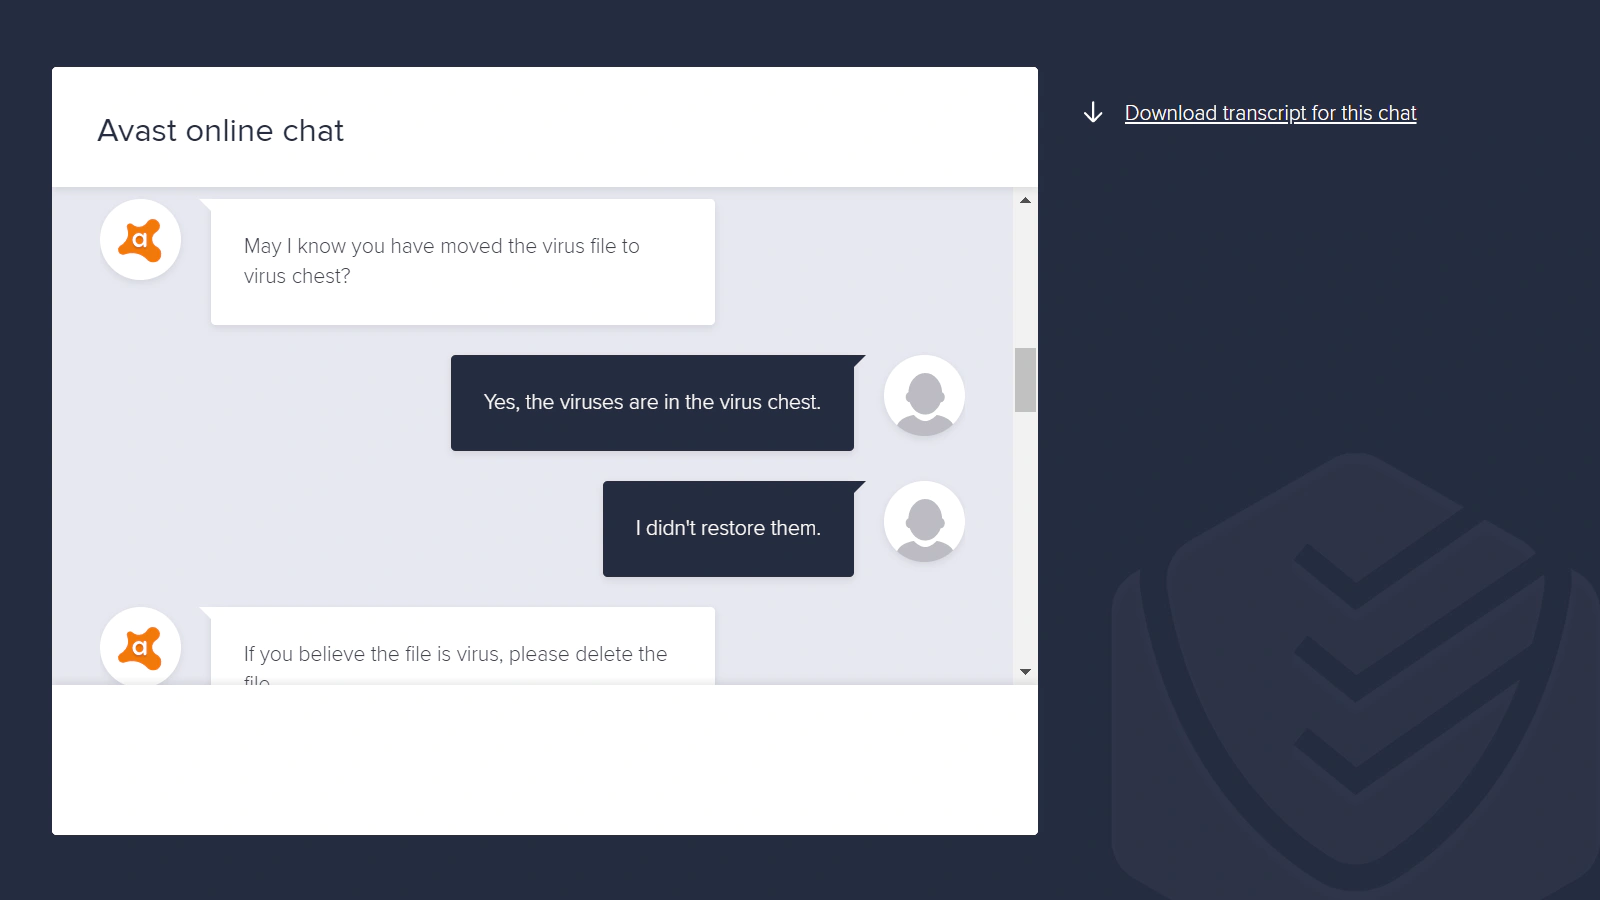 
Avast Customer support chat